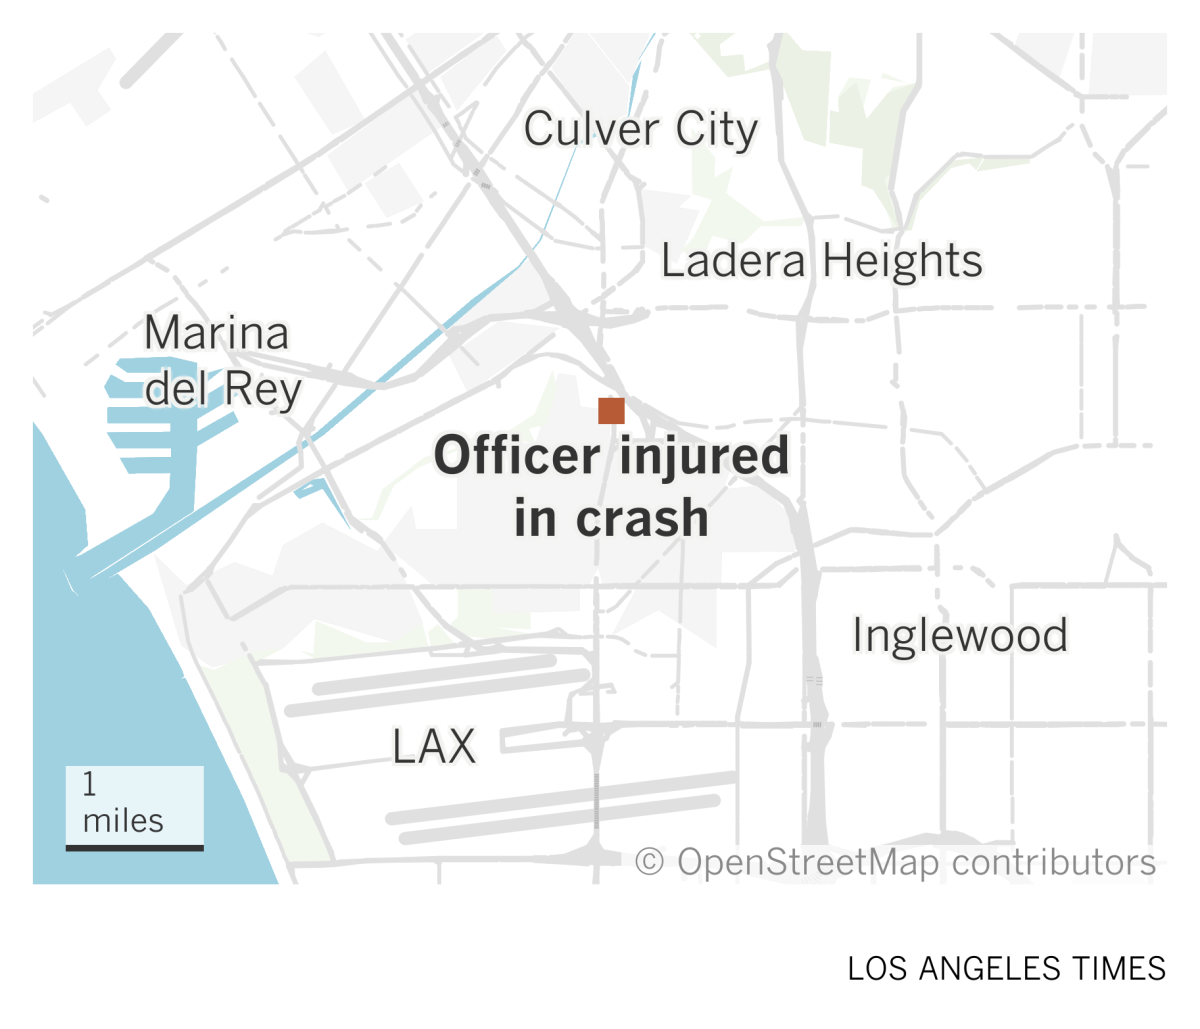 A map shows where a police officer was injured in a crash south of Culver City